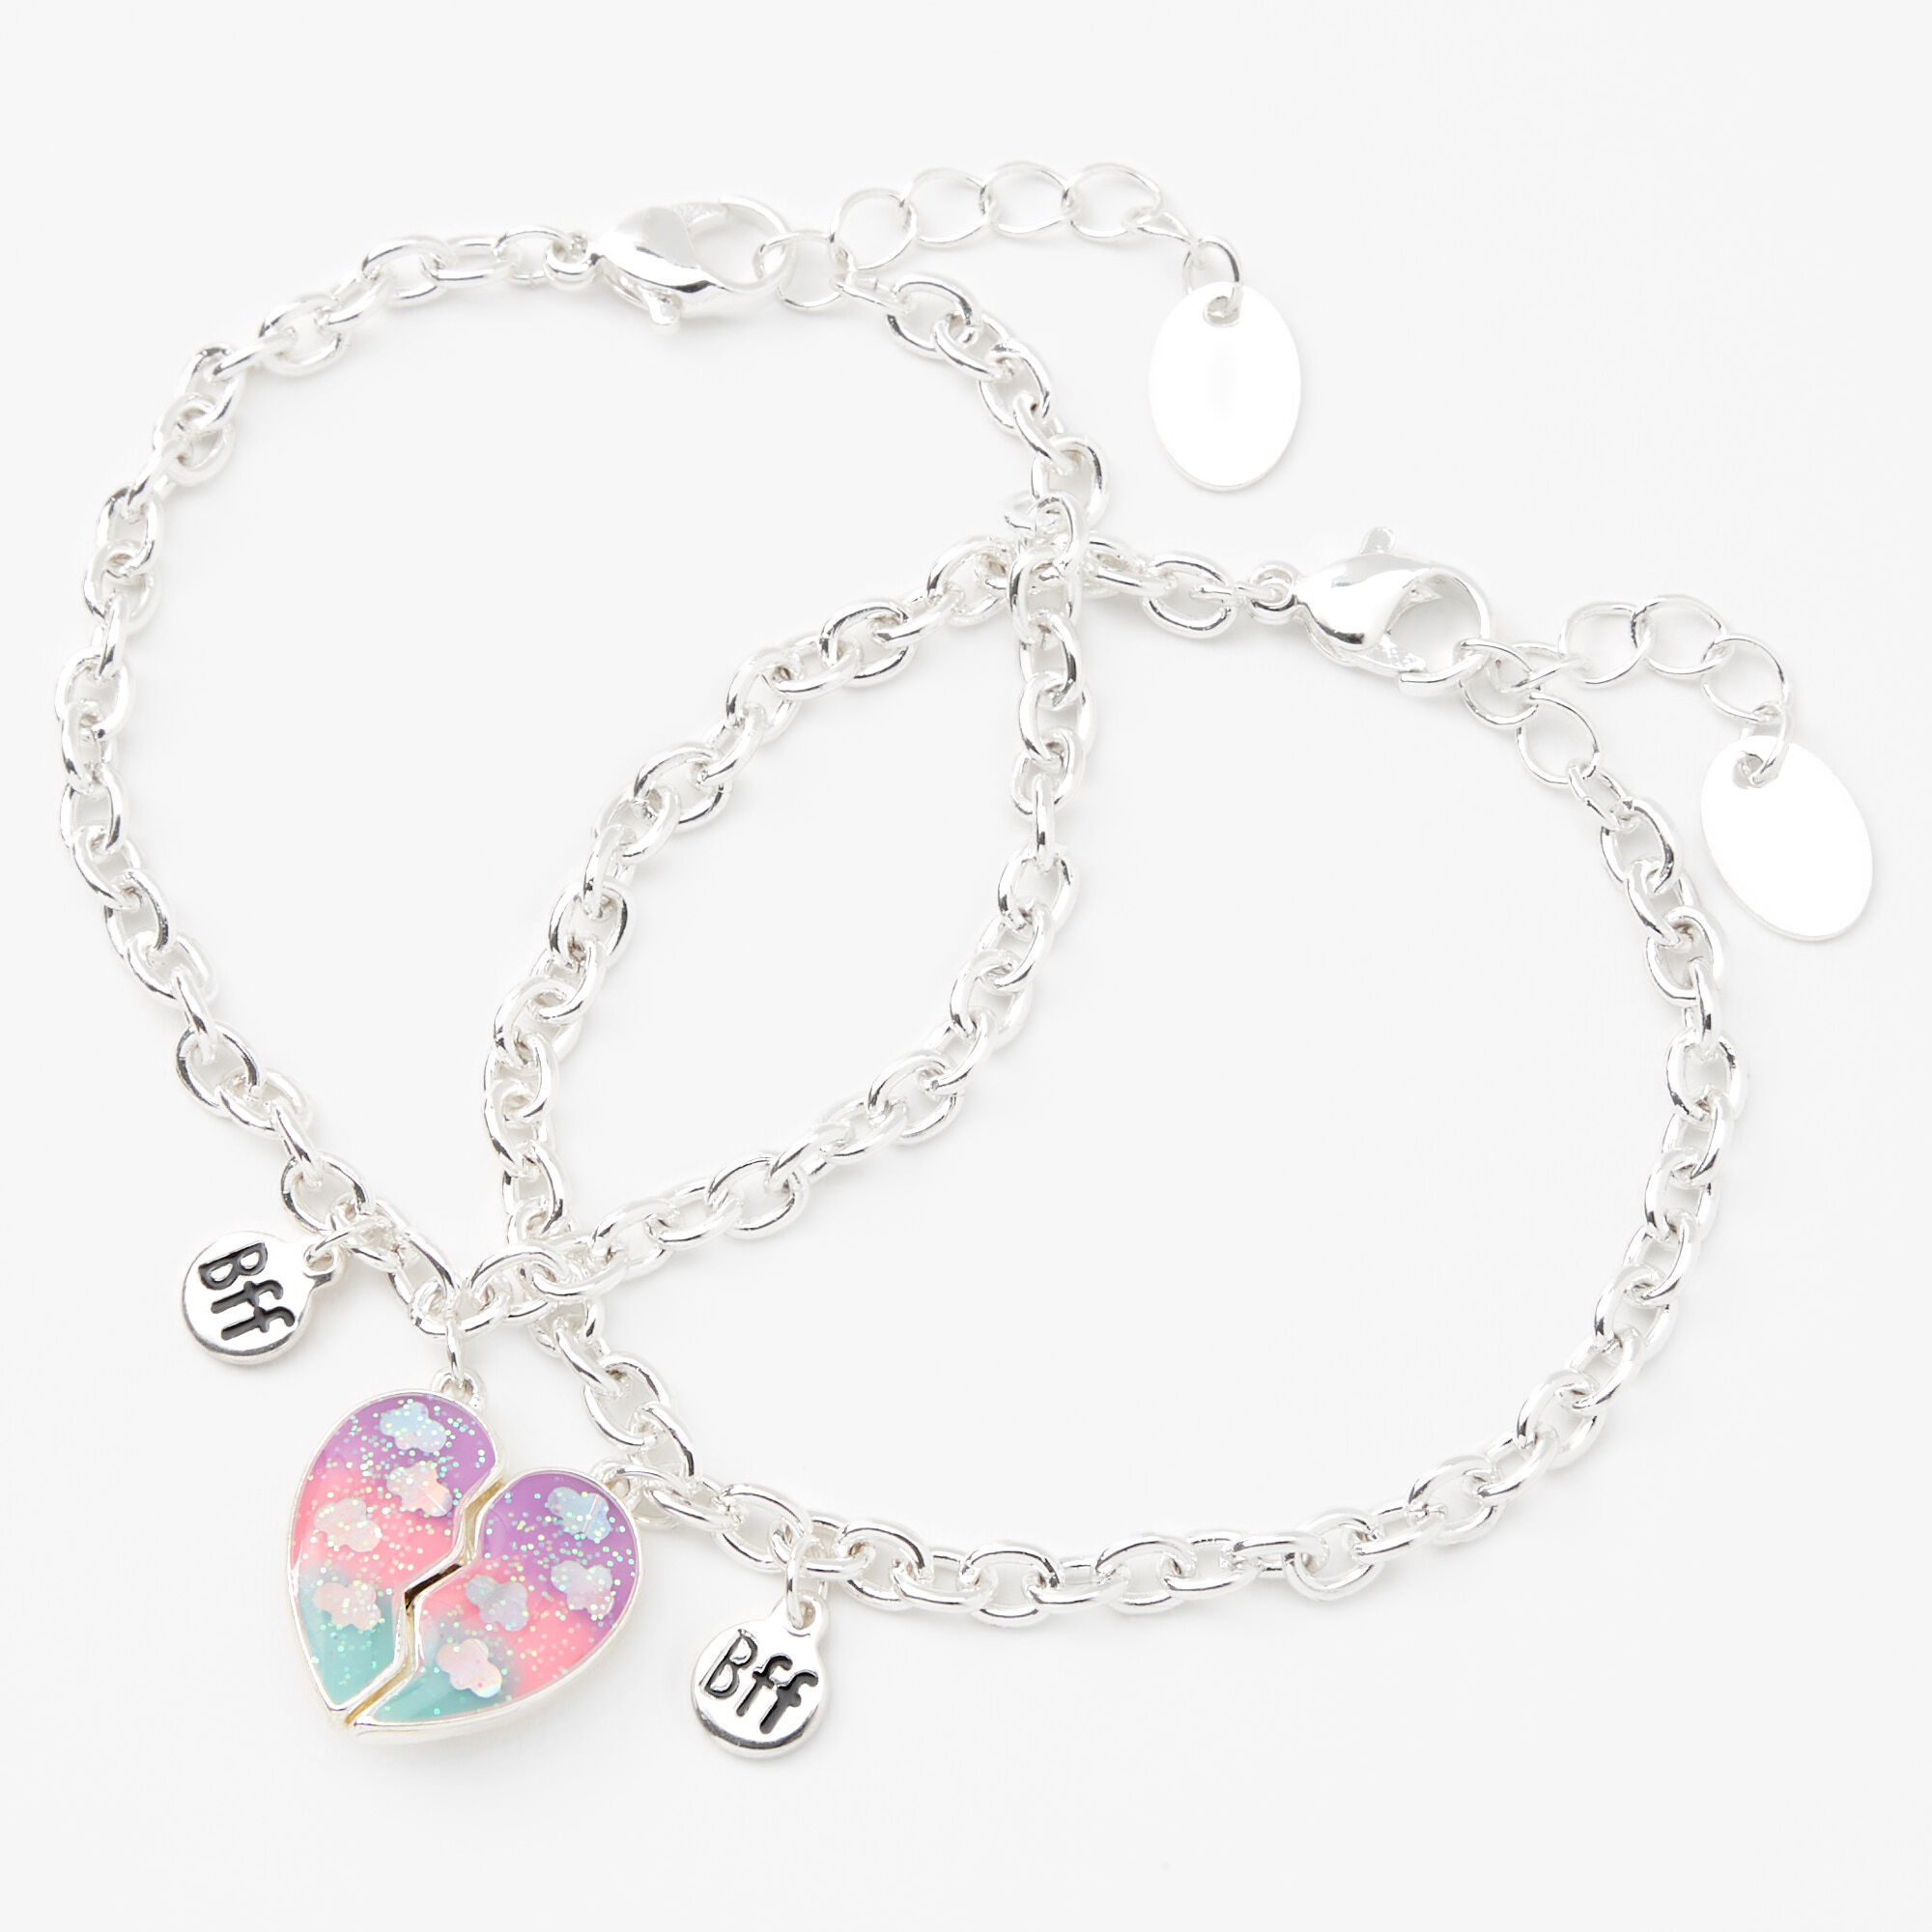 Amazon.com: Capital Charms Pink Hearts Silver Plated Charm Bracelet Set,  Jewelry Gifts with Beads, Charms, and Adjustable Snake Chain, Fits  7.5